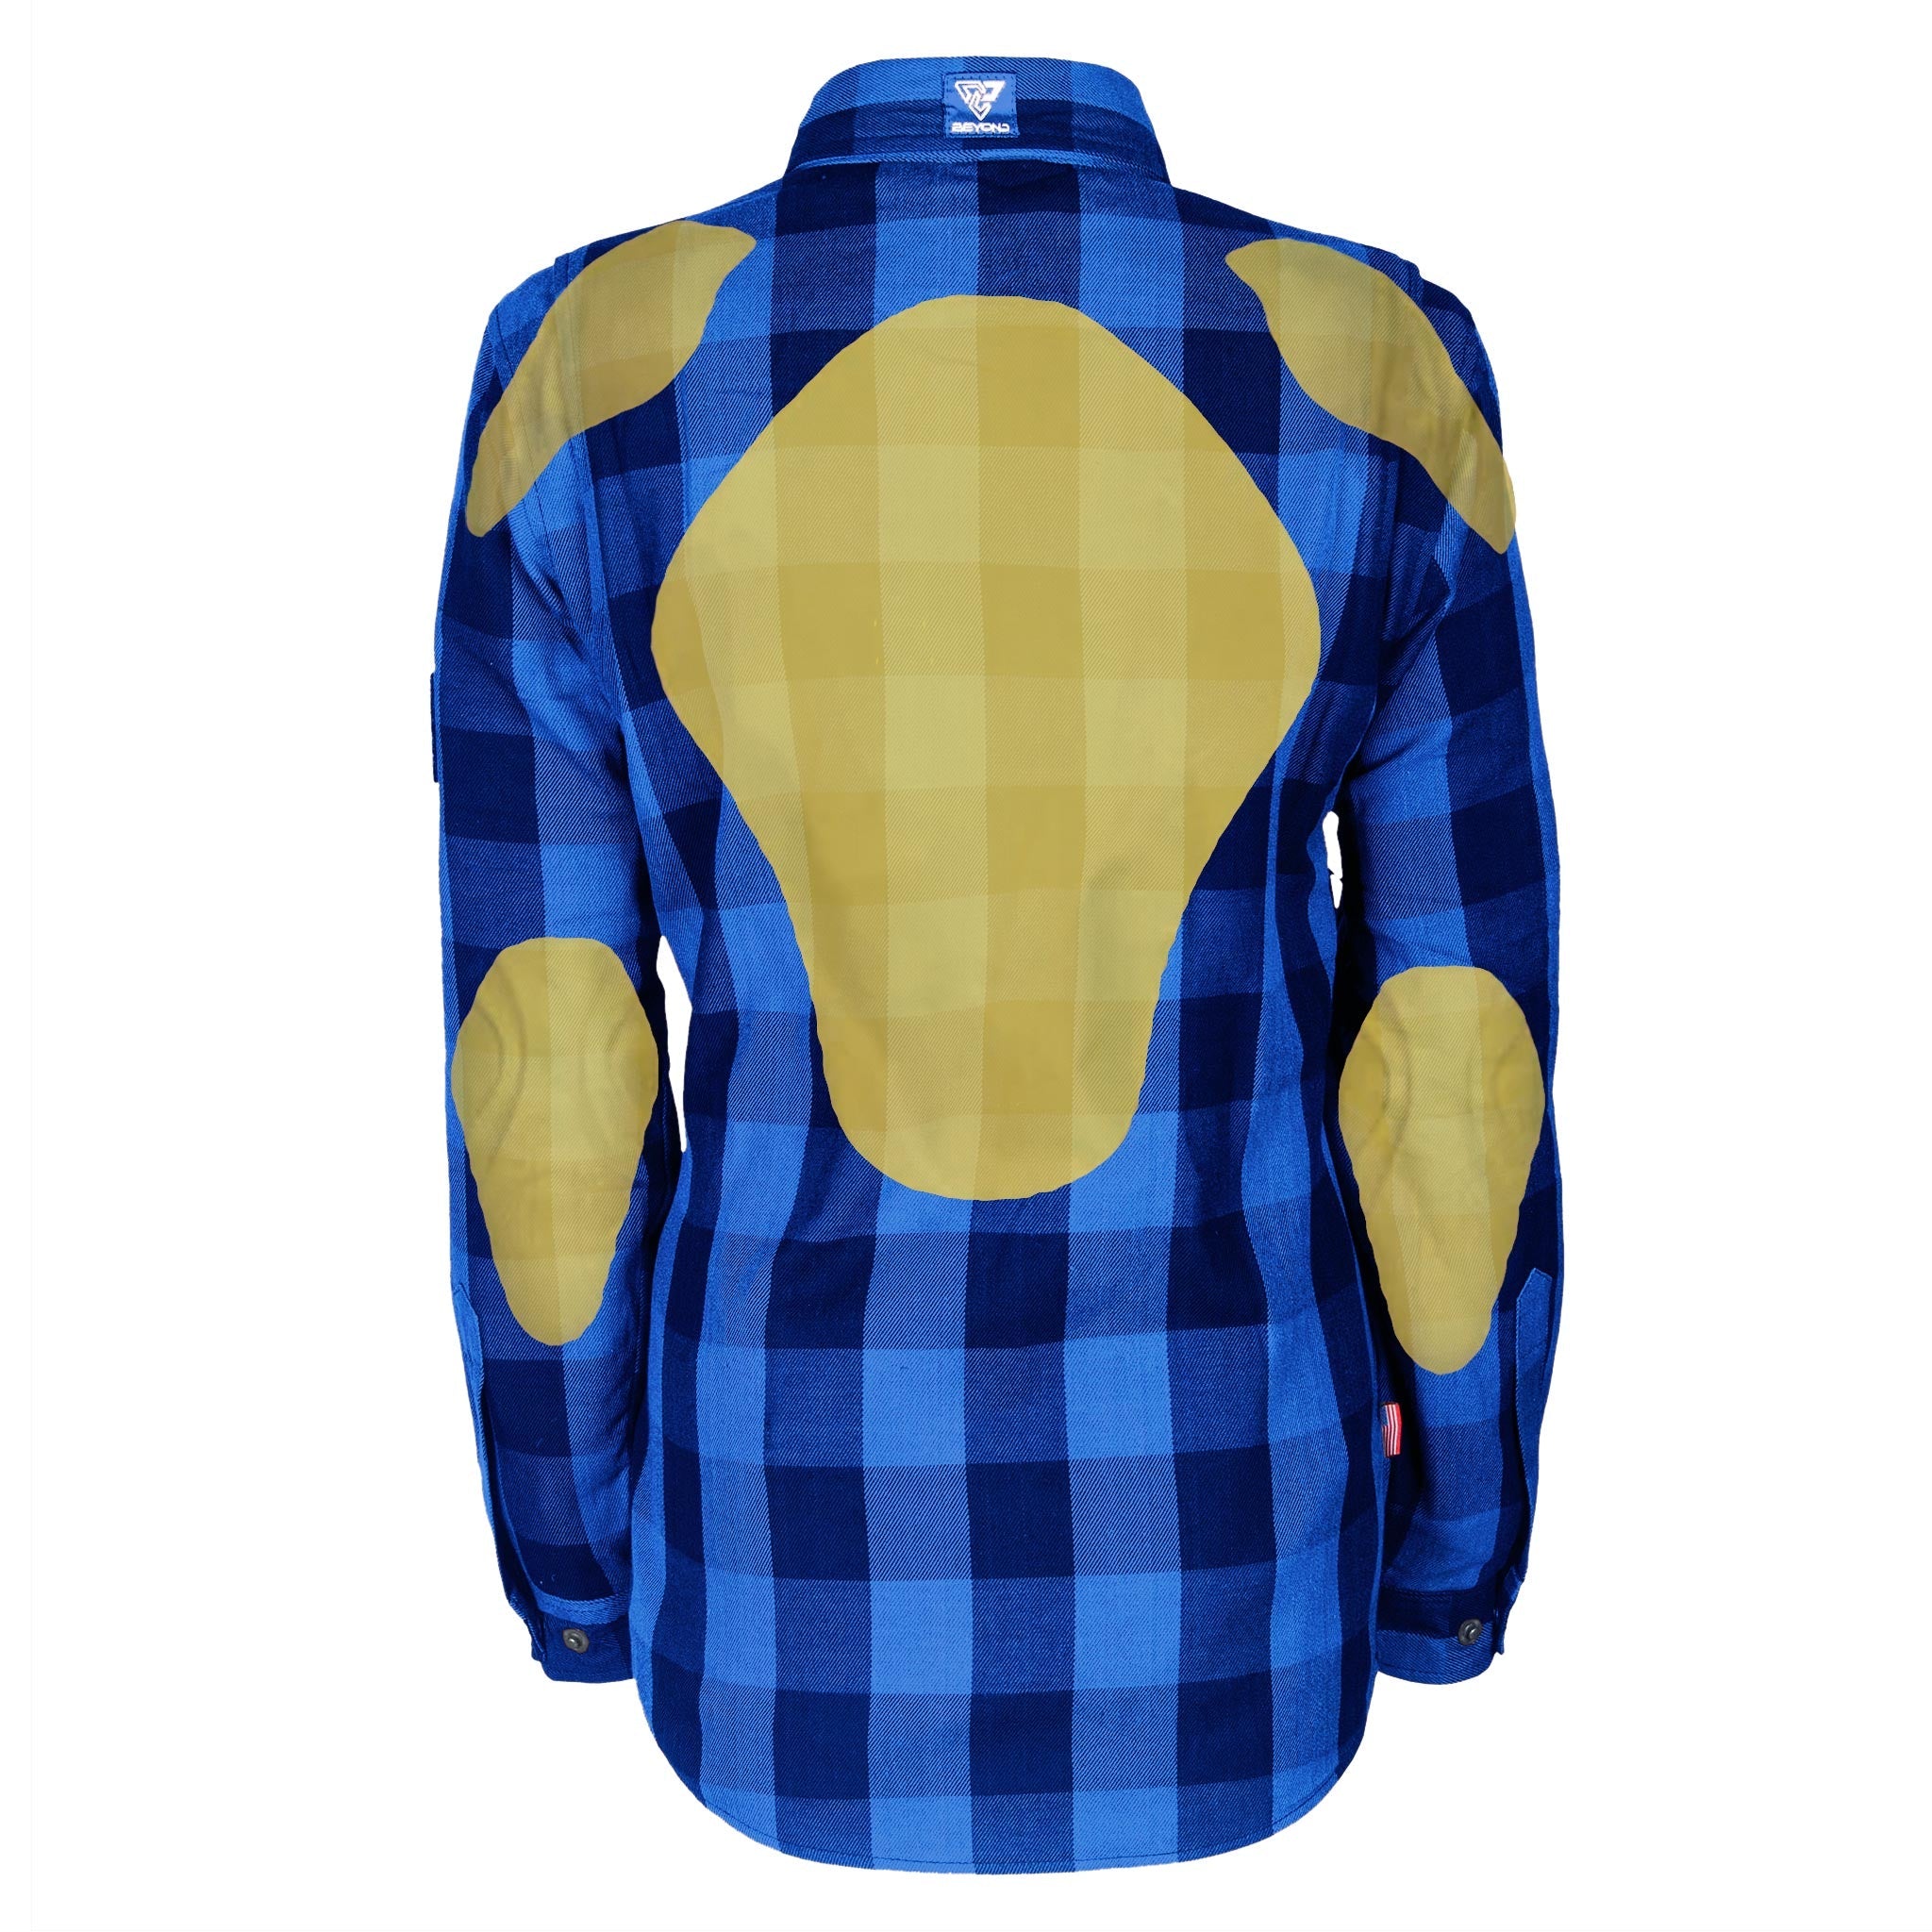 SALE Protective Flannel Shirt for Women - Blue Checkered with Pads